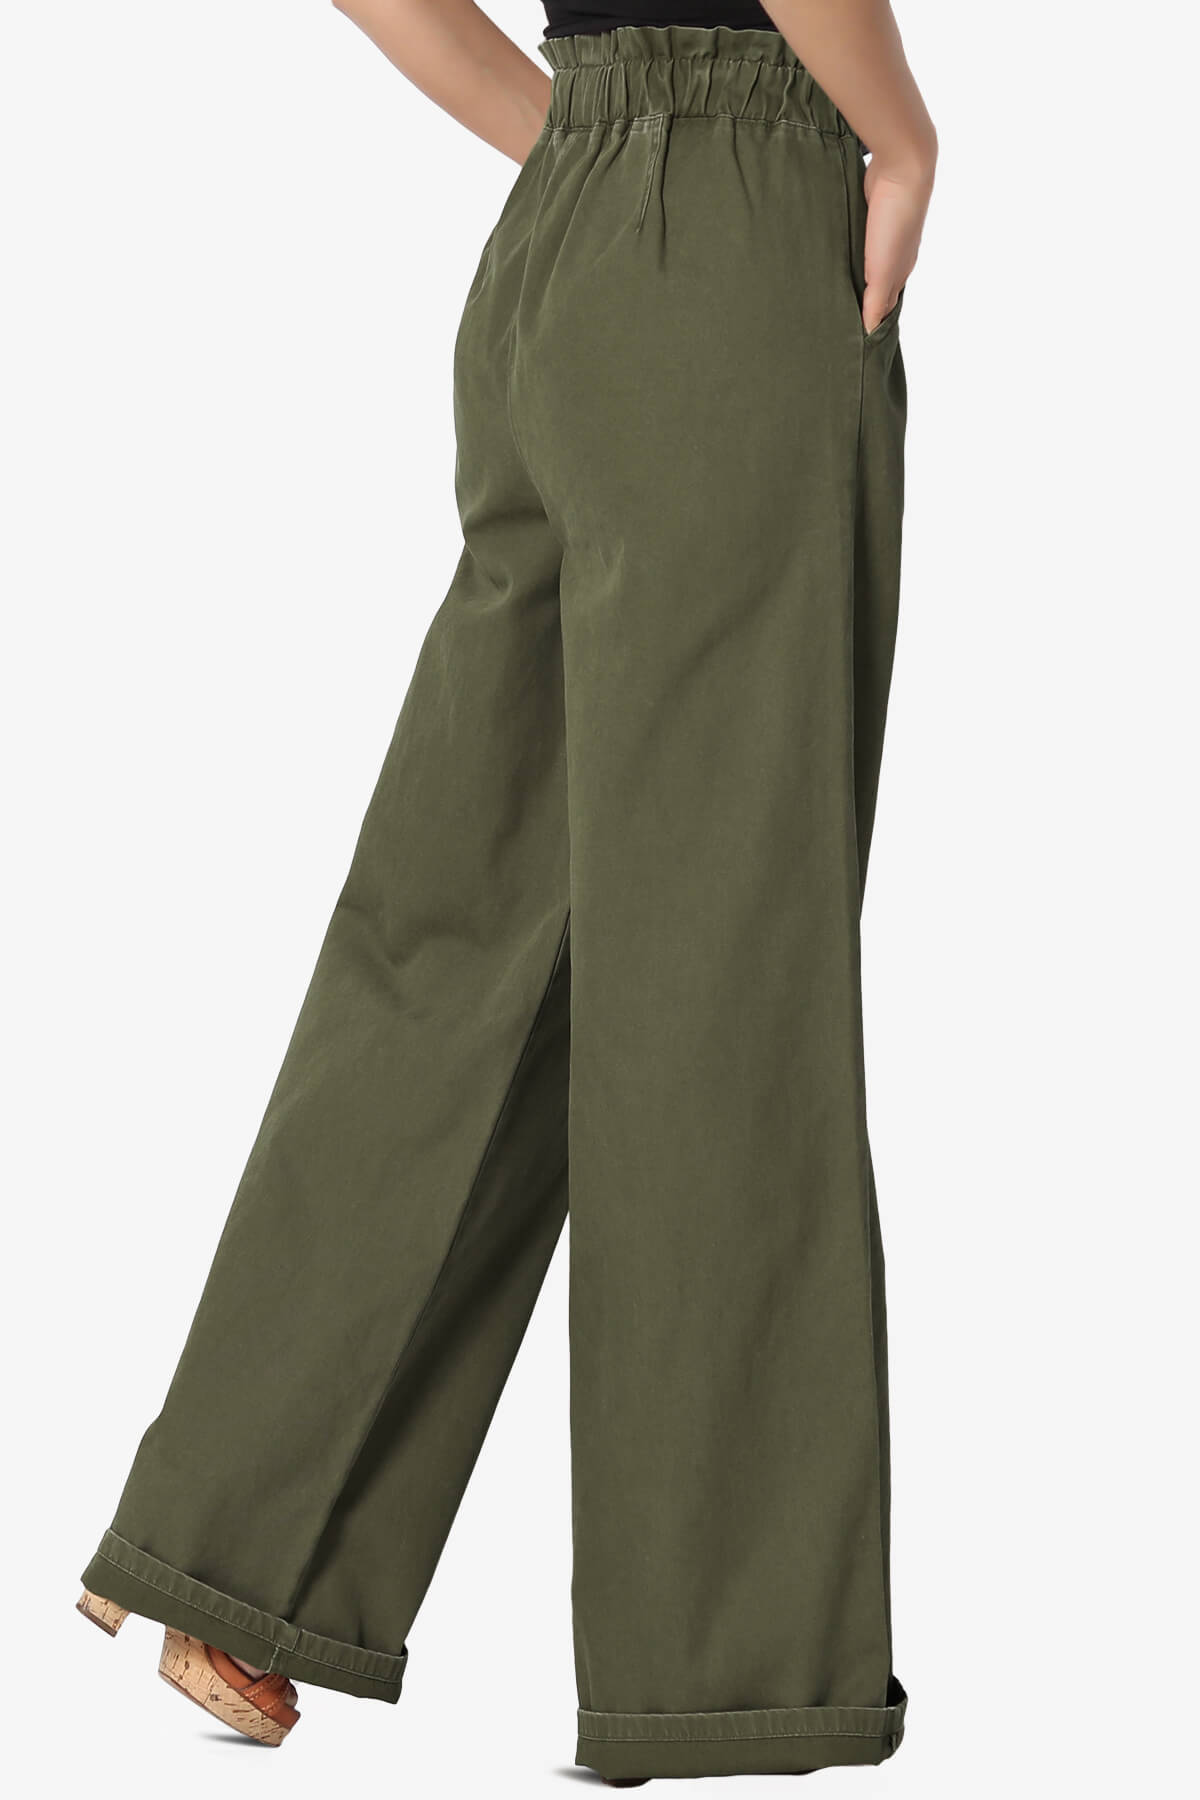 Load image into Gallery viewer, Fateful Twill High Waist Wide Leg Pants OLIVE_4
